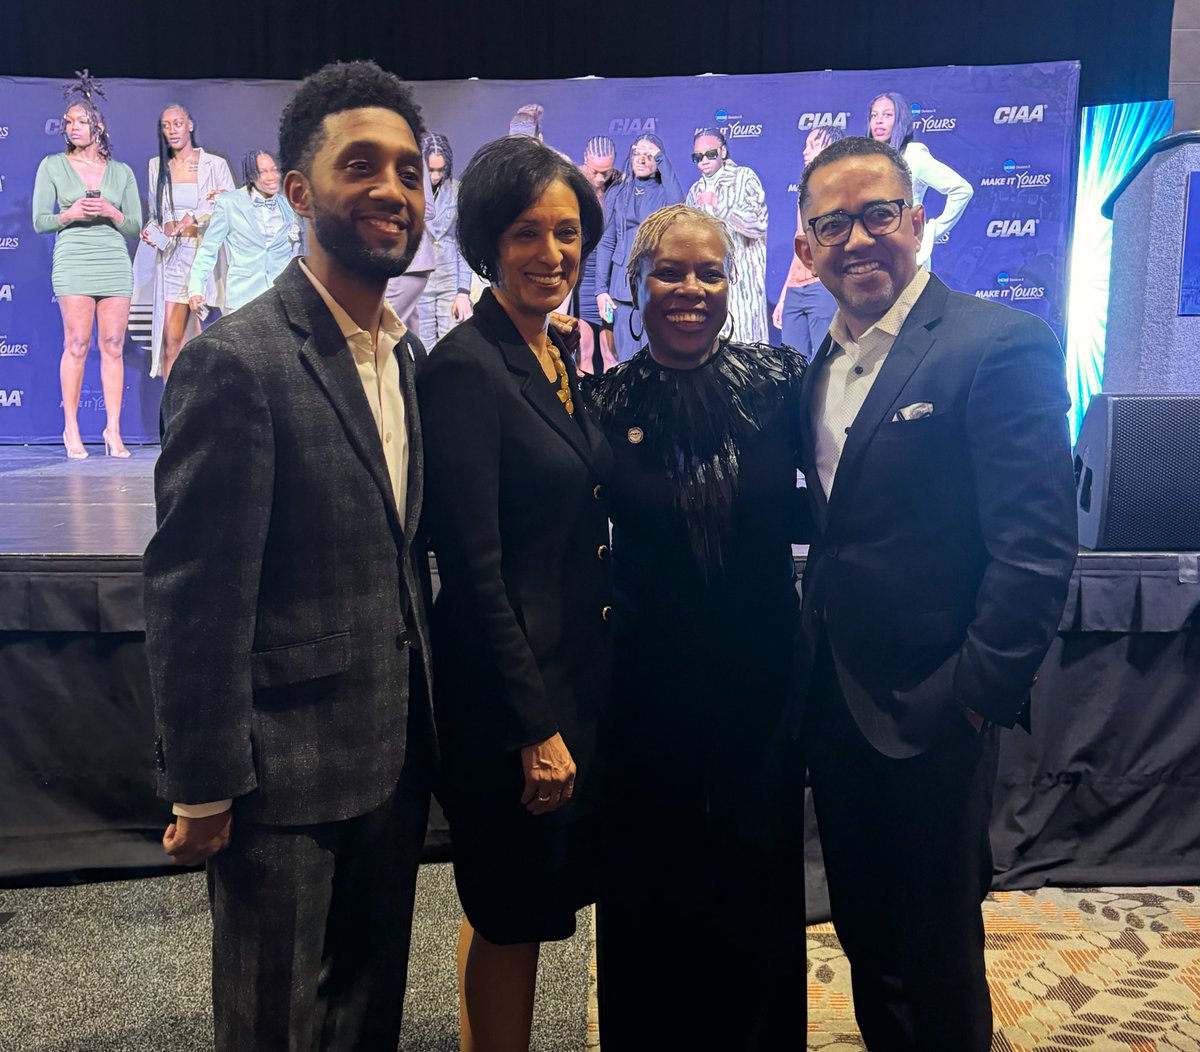 Honored to have @CIAAForLife Chair @PresBreaux and Vice chair @profdillard on my side. Their poise and example is inspiring to my own growth! It’s Black History every day in the CIAA and I am proud to be part of their legacy! #HBCUpride #Februaryis #CIAAforlife #livethelegacy